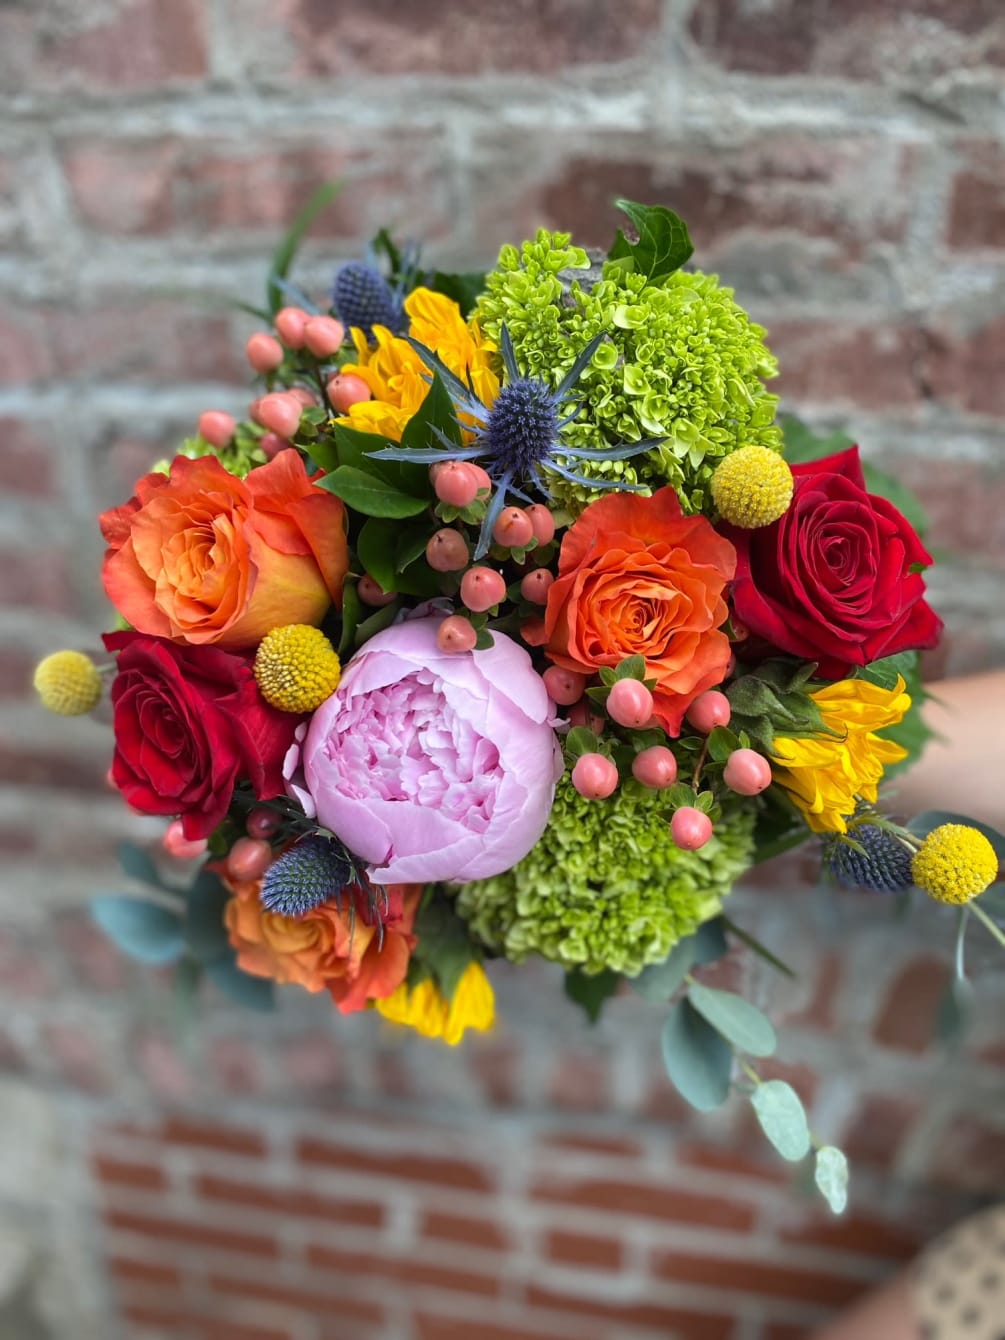 Seasonal arrangement with bright jewel tones and vibrant colors! Flower selections will